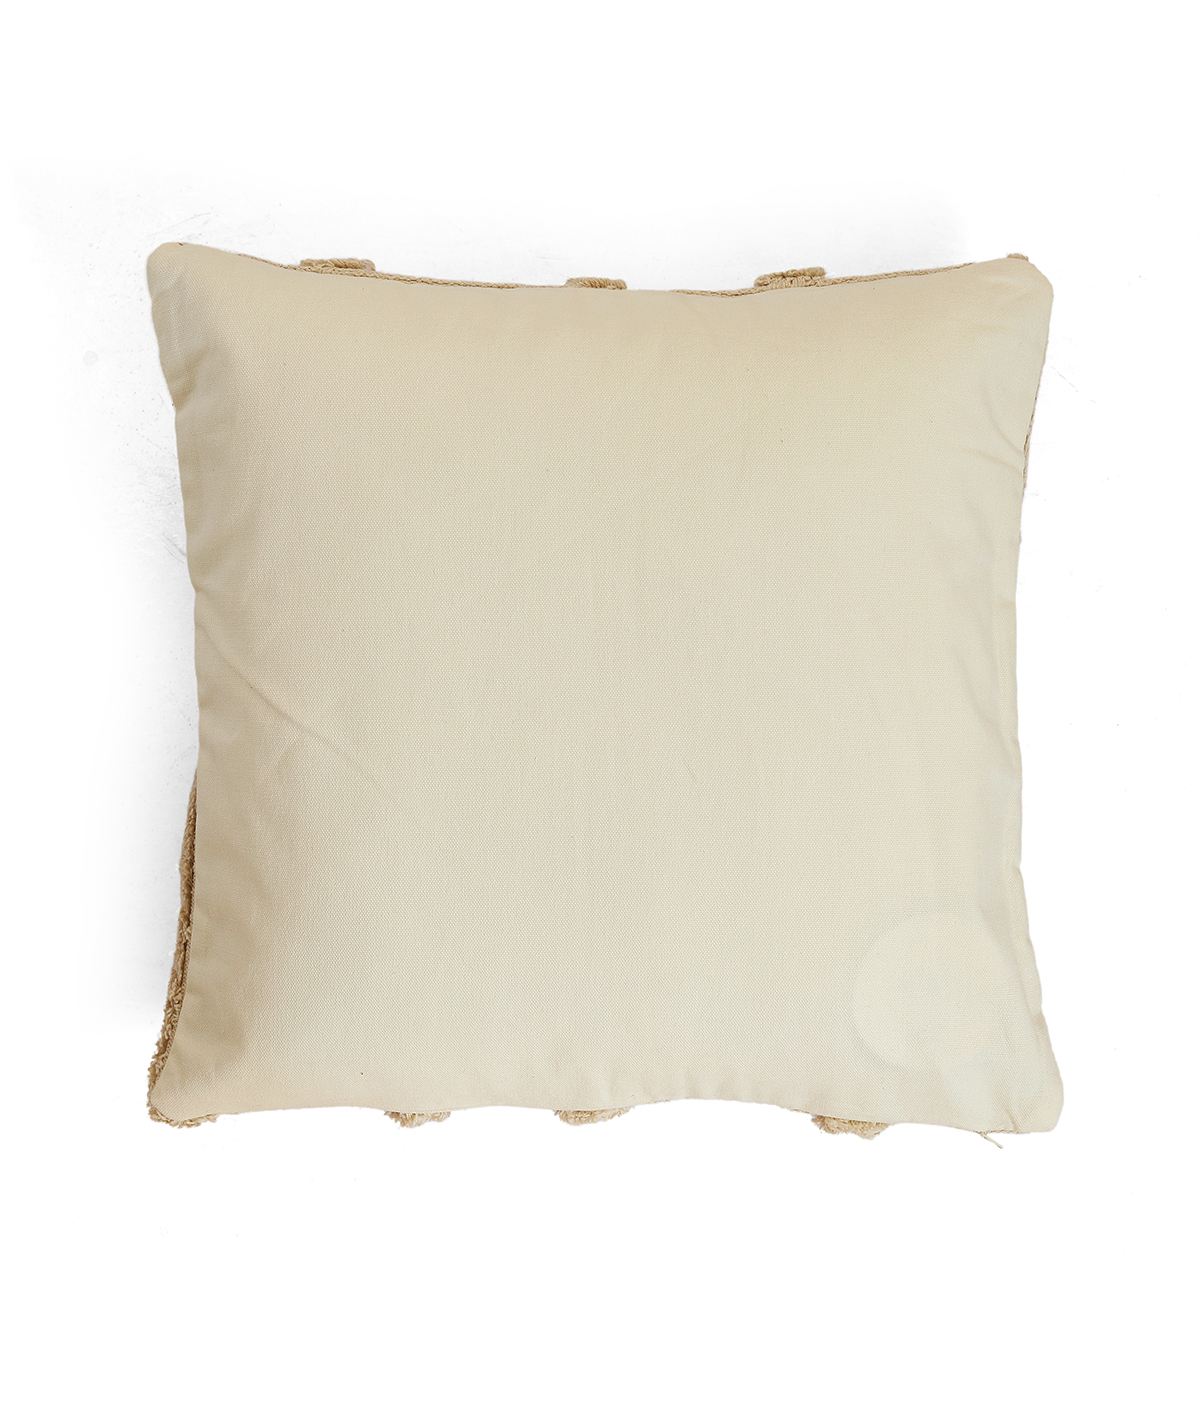  cushion covers online